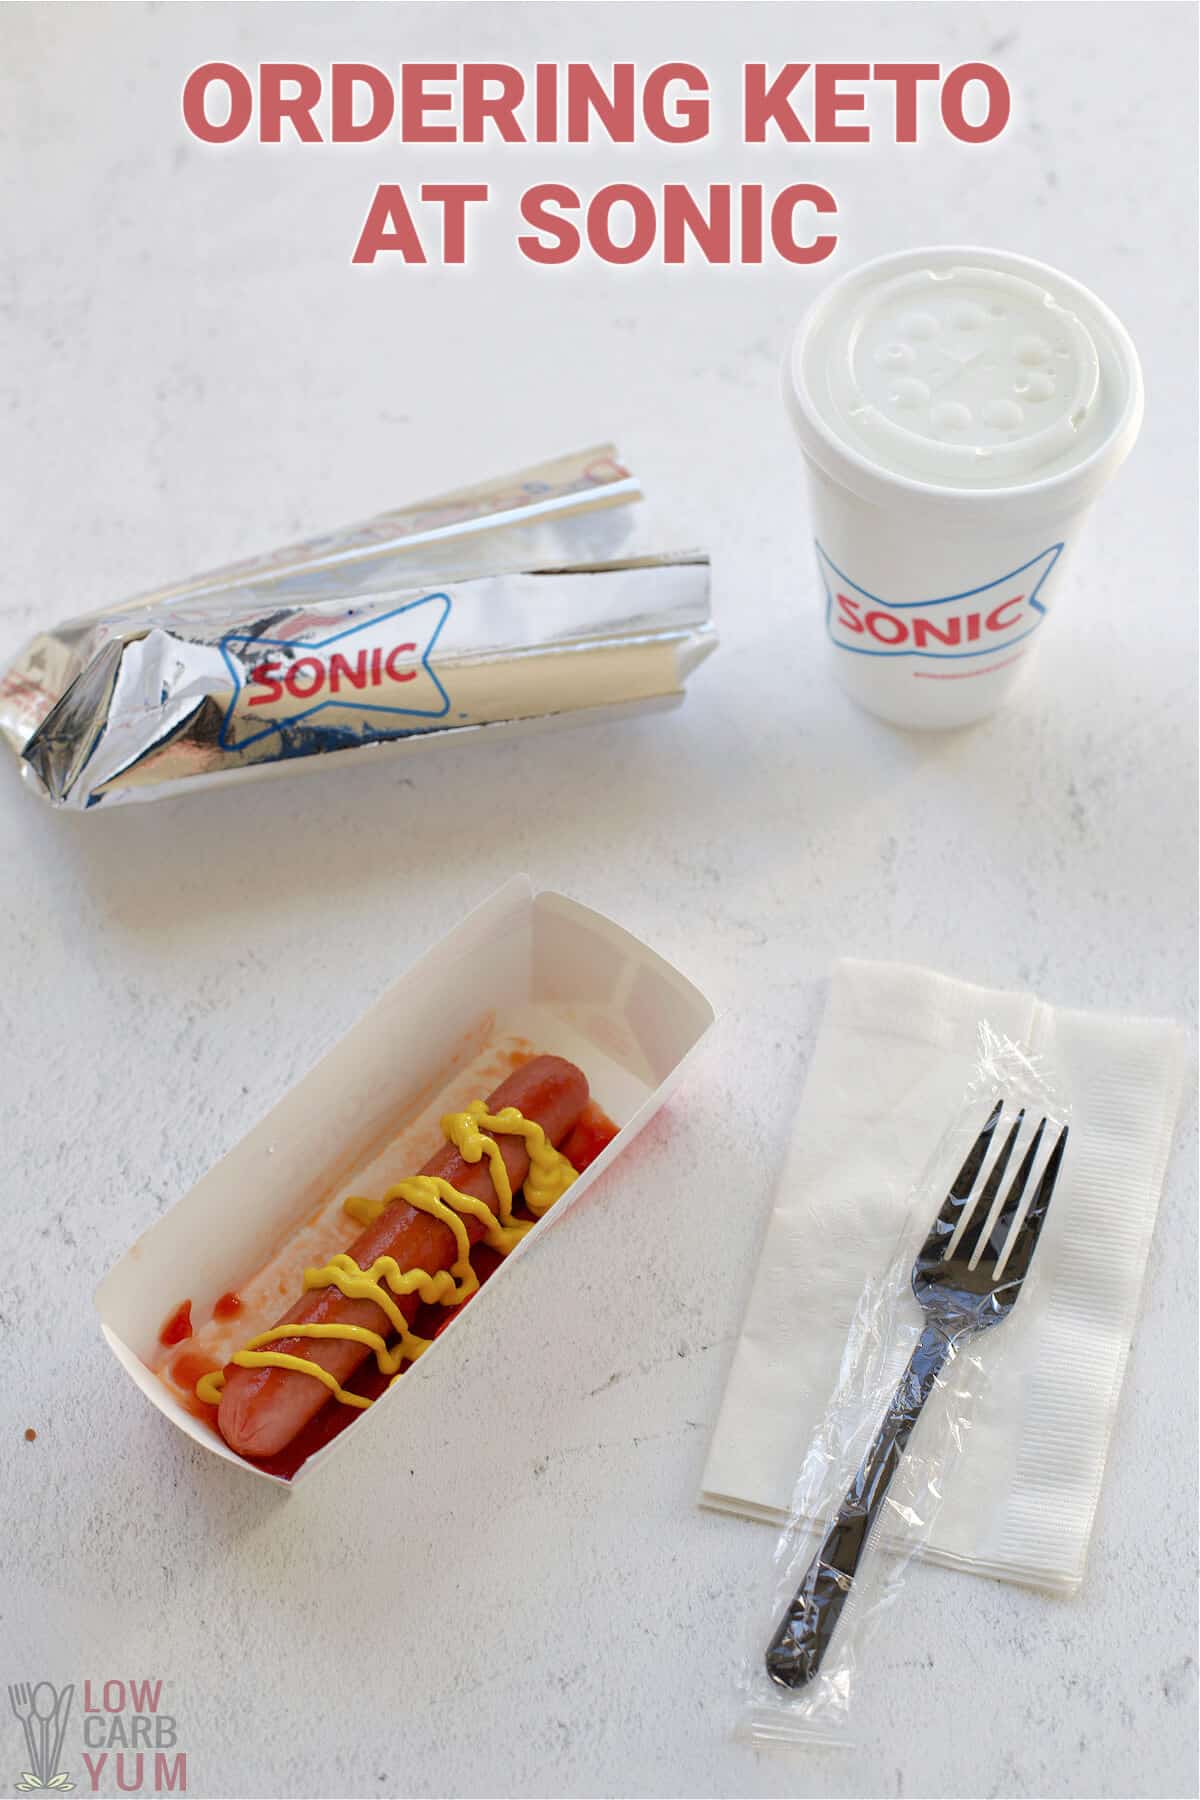 keto at sonic image with text overlay.